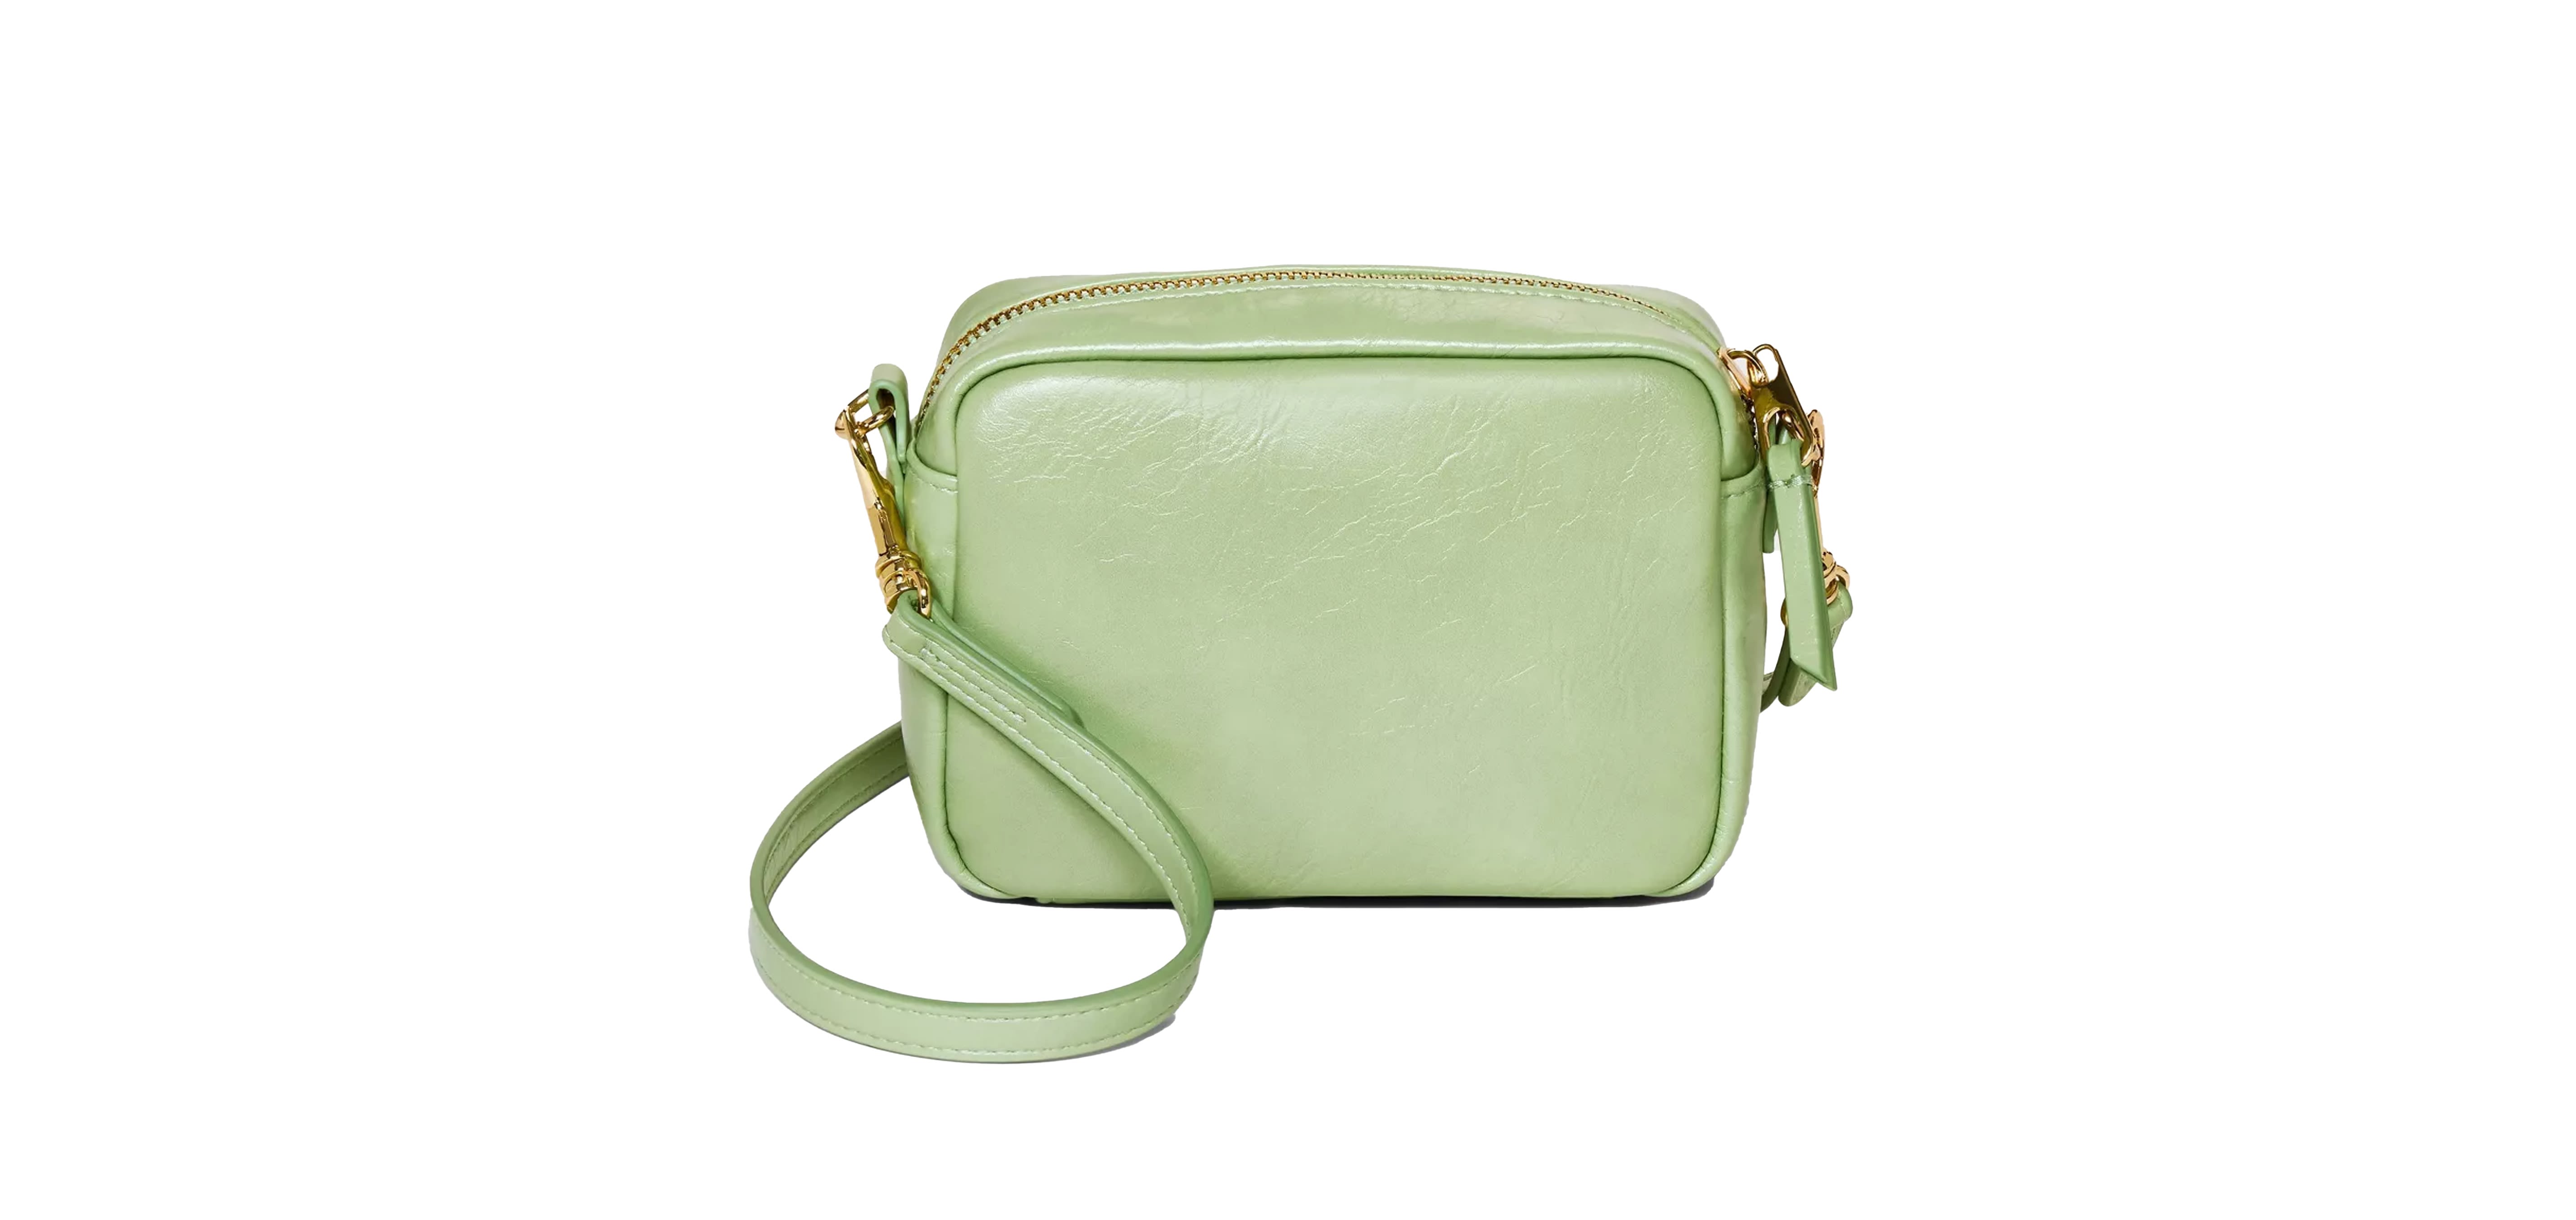 30 best crossbody bags and purses for travel